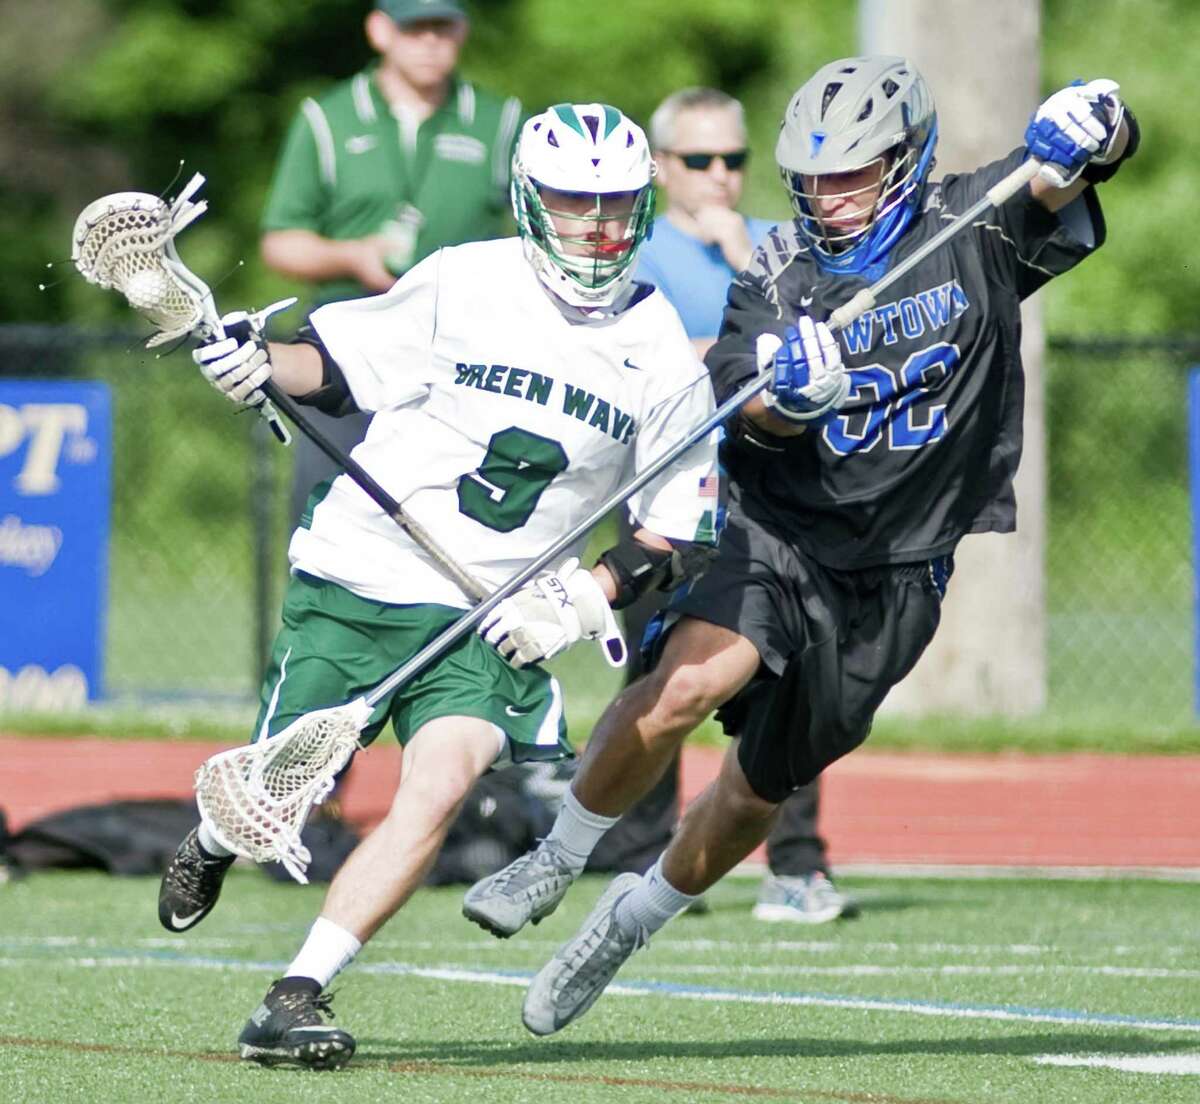 New Milford High School's Justin Lourenco is stick checked by Newtown High School's Nicholas Rubino in the boys lacrosse Class L first round game played at Brookfield High School. Wednesday, June, 3, 2015